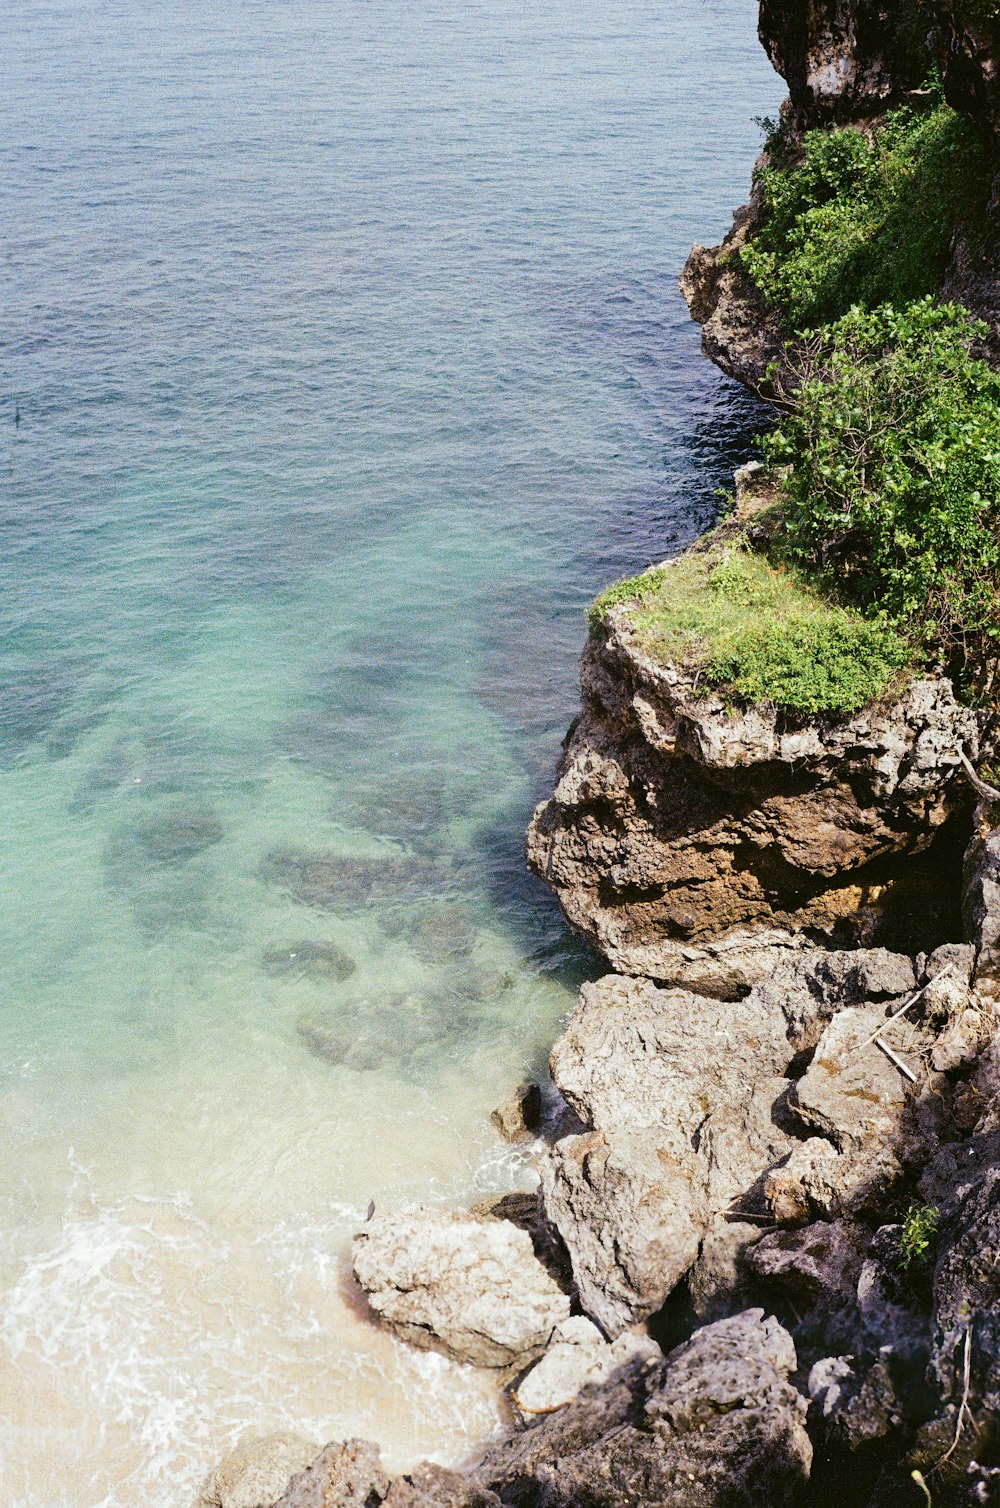 a body of water sitting next to a rocky cliff